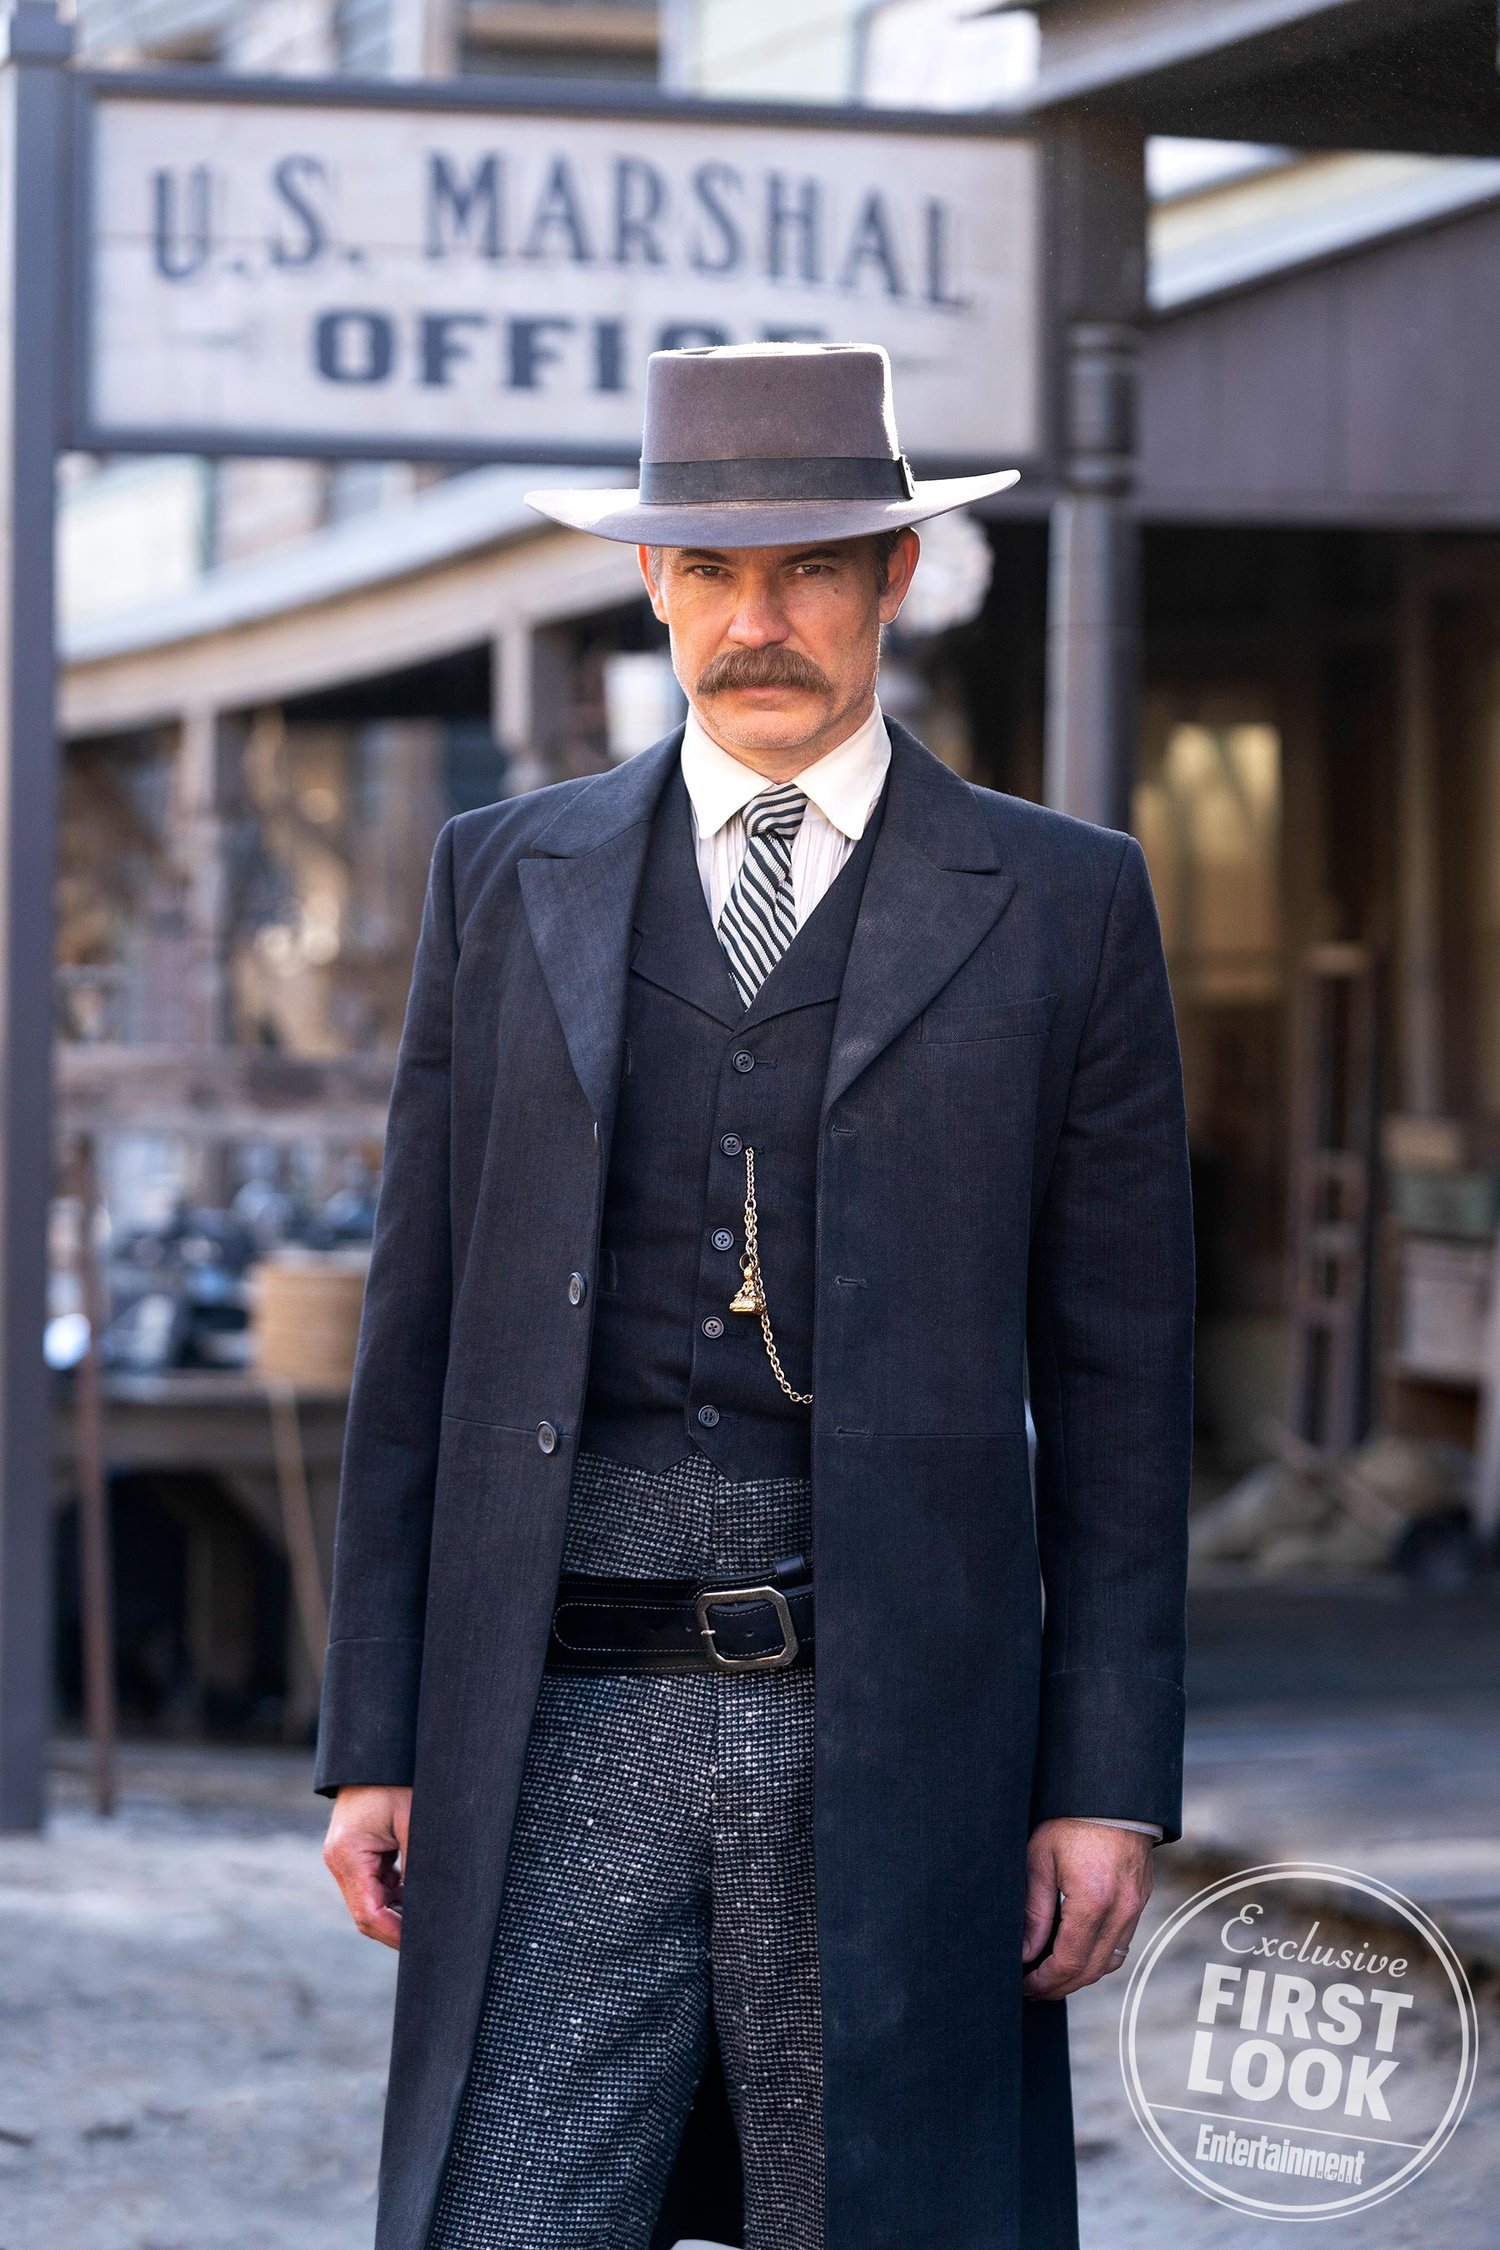 official-photos-released-for-hbos-long-awaited-deadwood-movie2